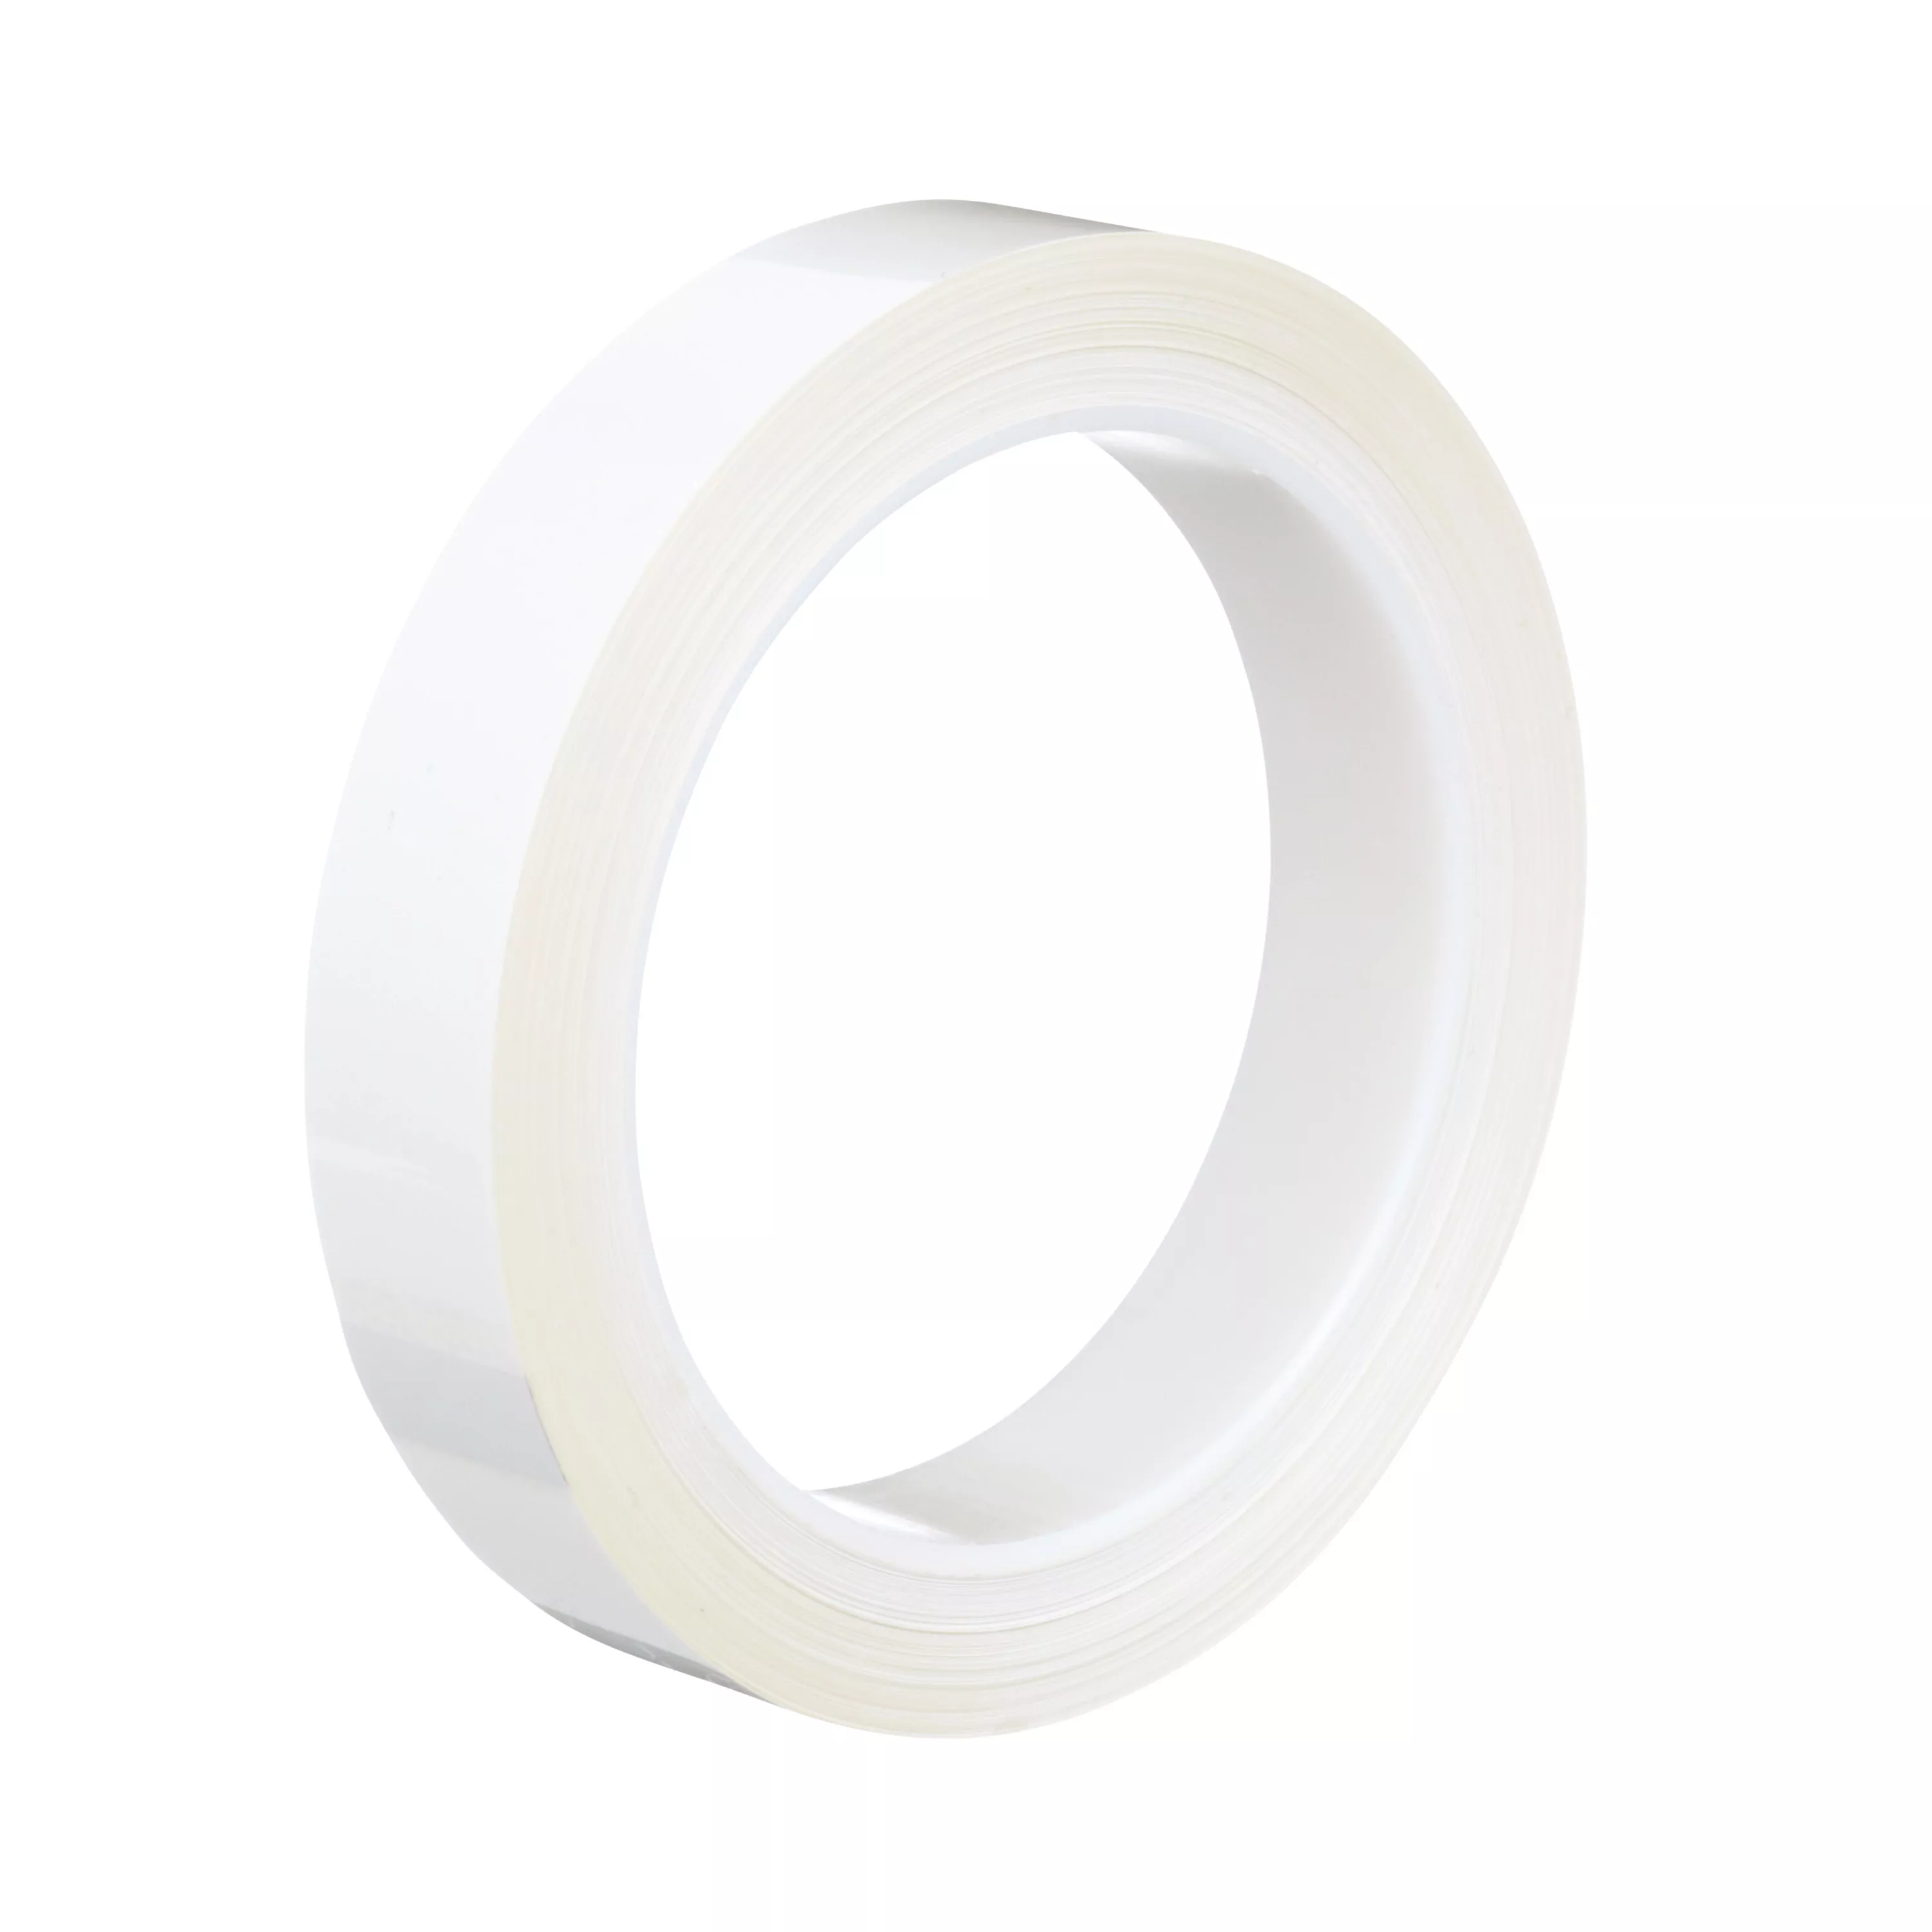 3M™ Polyester Film Tape 850, White, 3 in x 72 yd, 1.9 mil, 12 Roll/Case